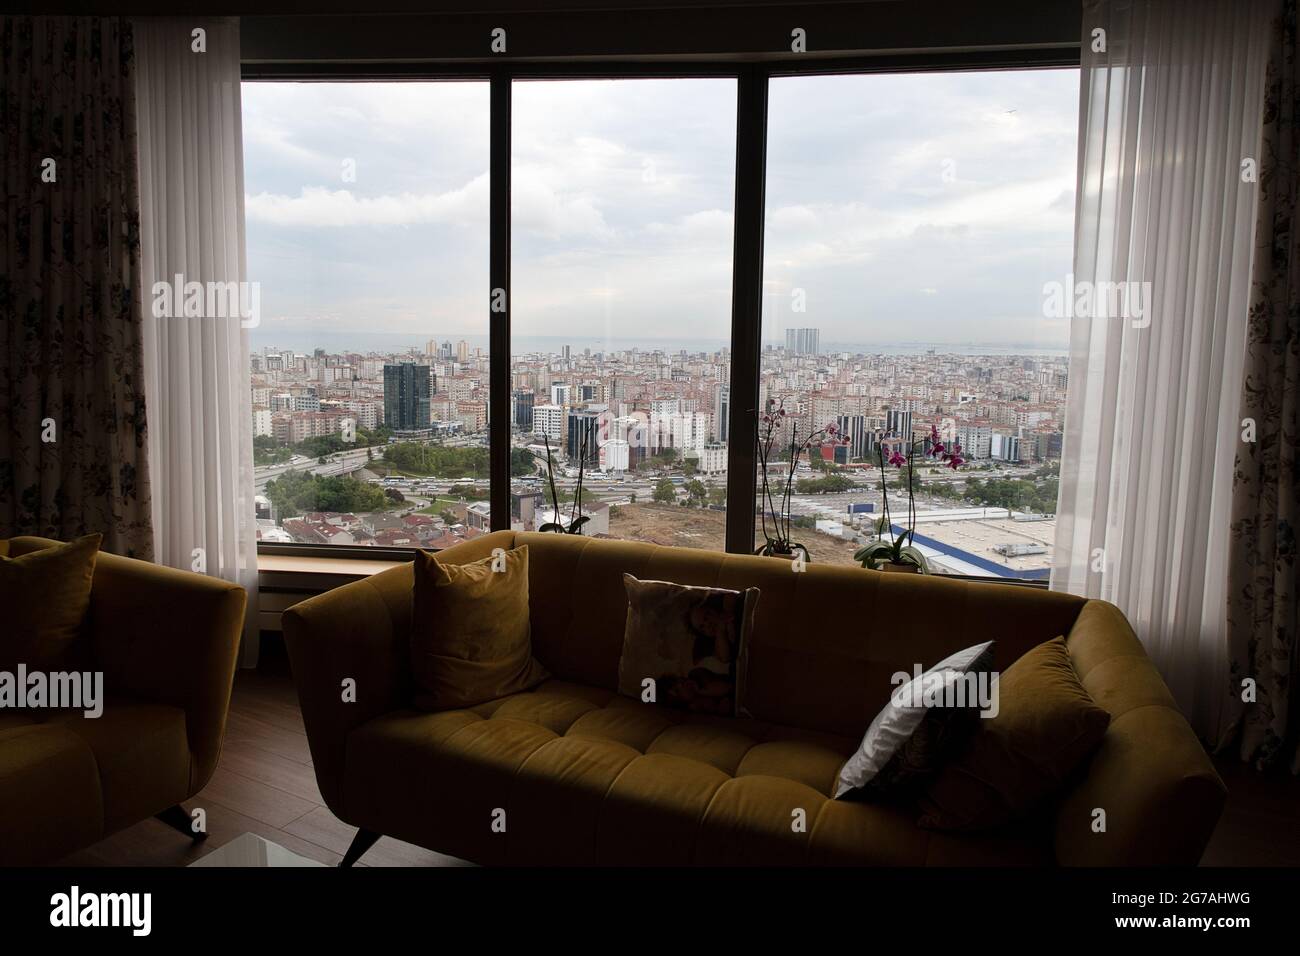 View from the apartment on the city of Istanbul, in the background the Sea of Marmara can be seen. Stock Photo